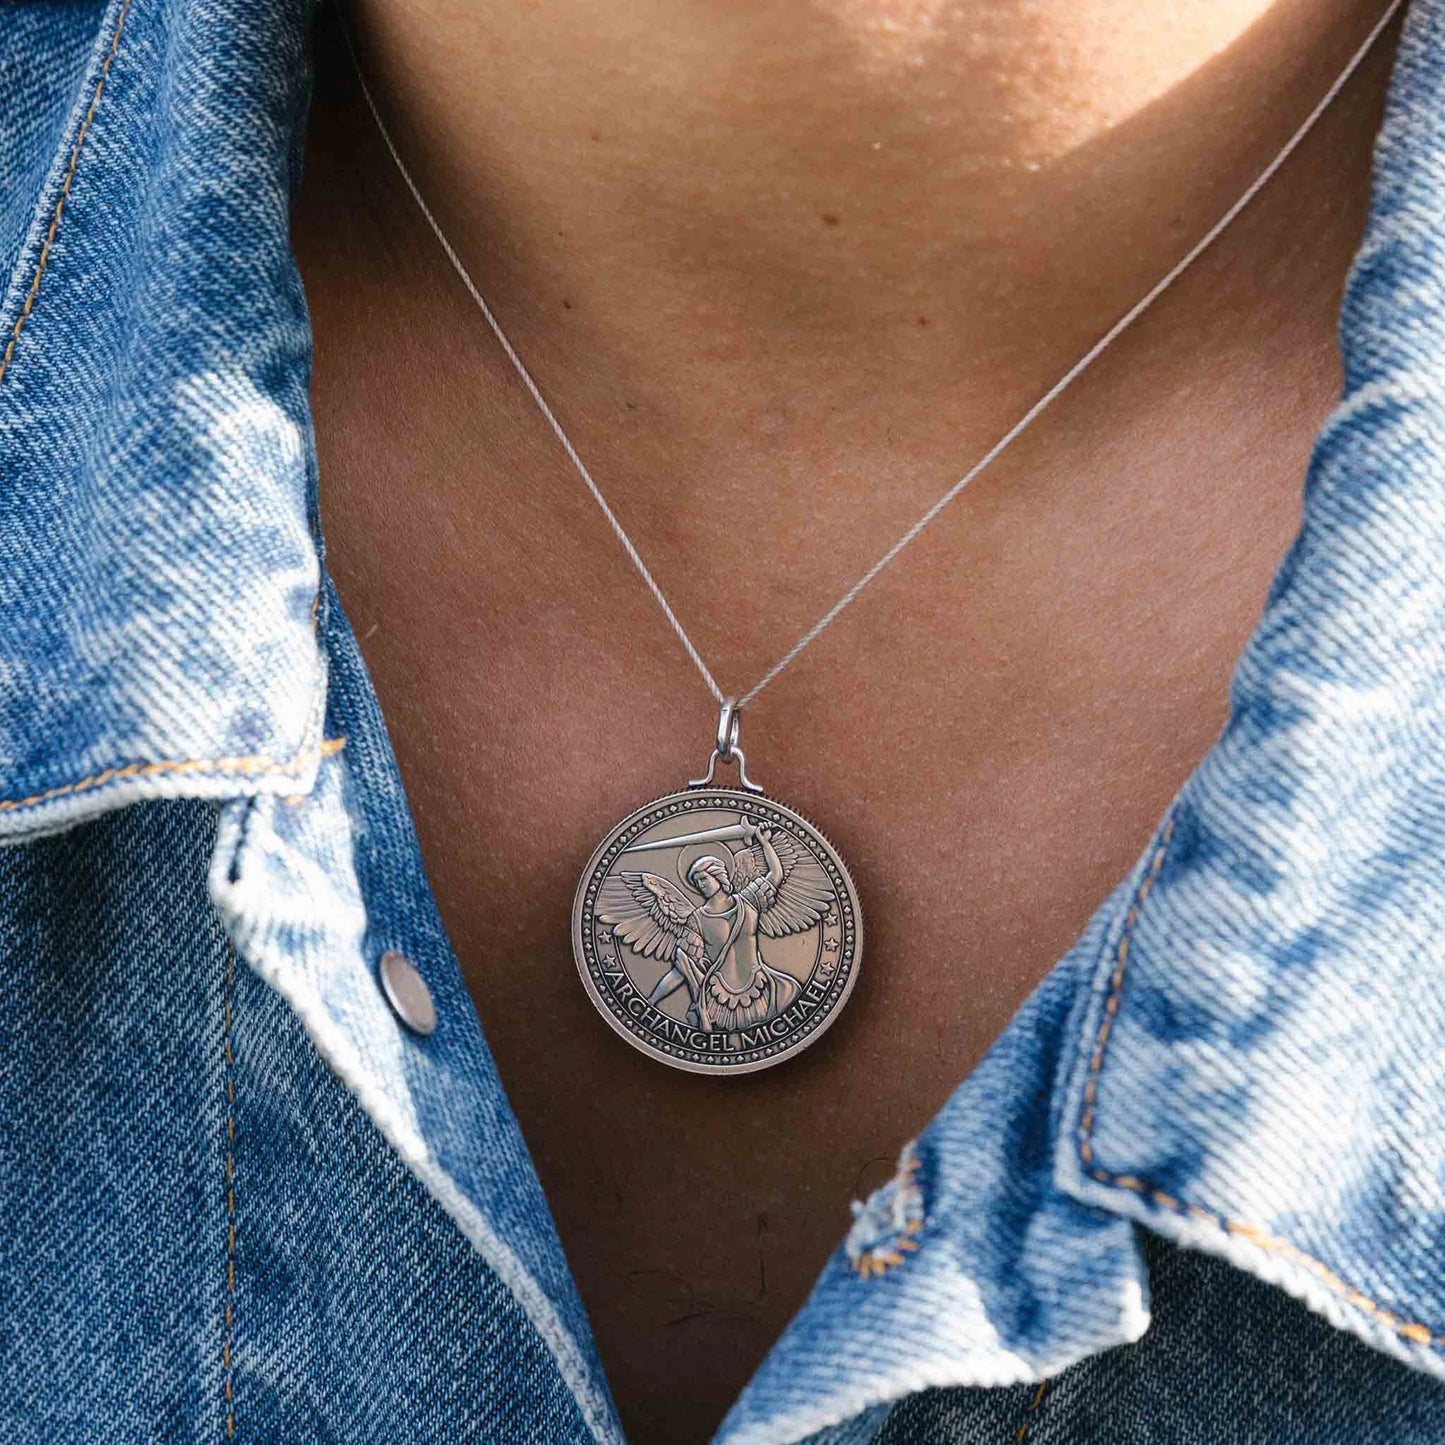 Mother Mary + Archangel Michael Protection Necklace